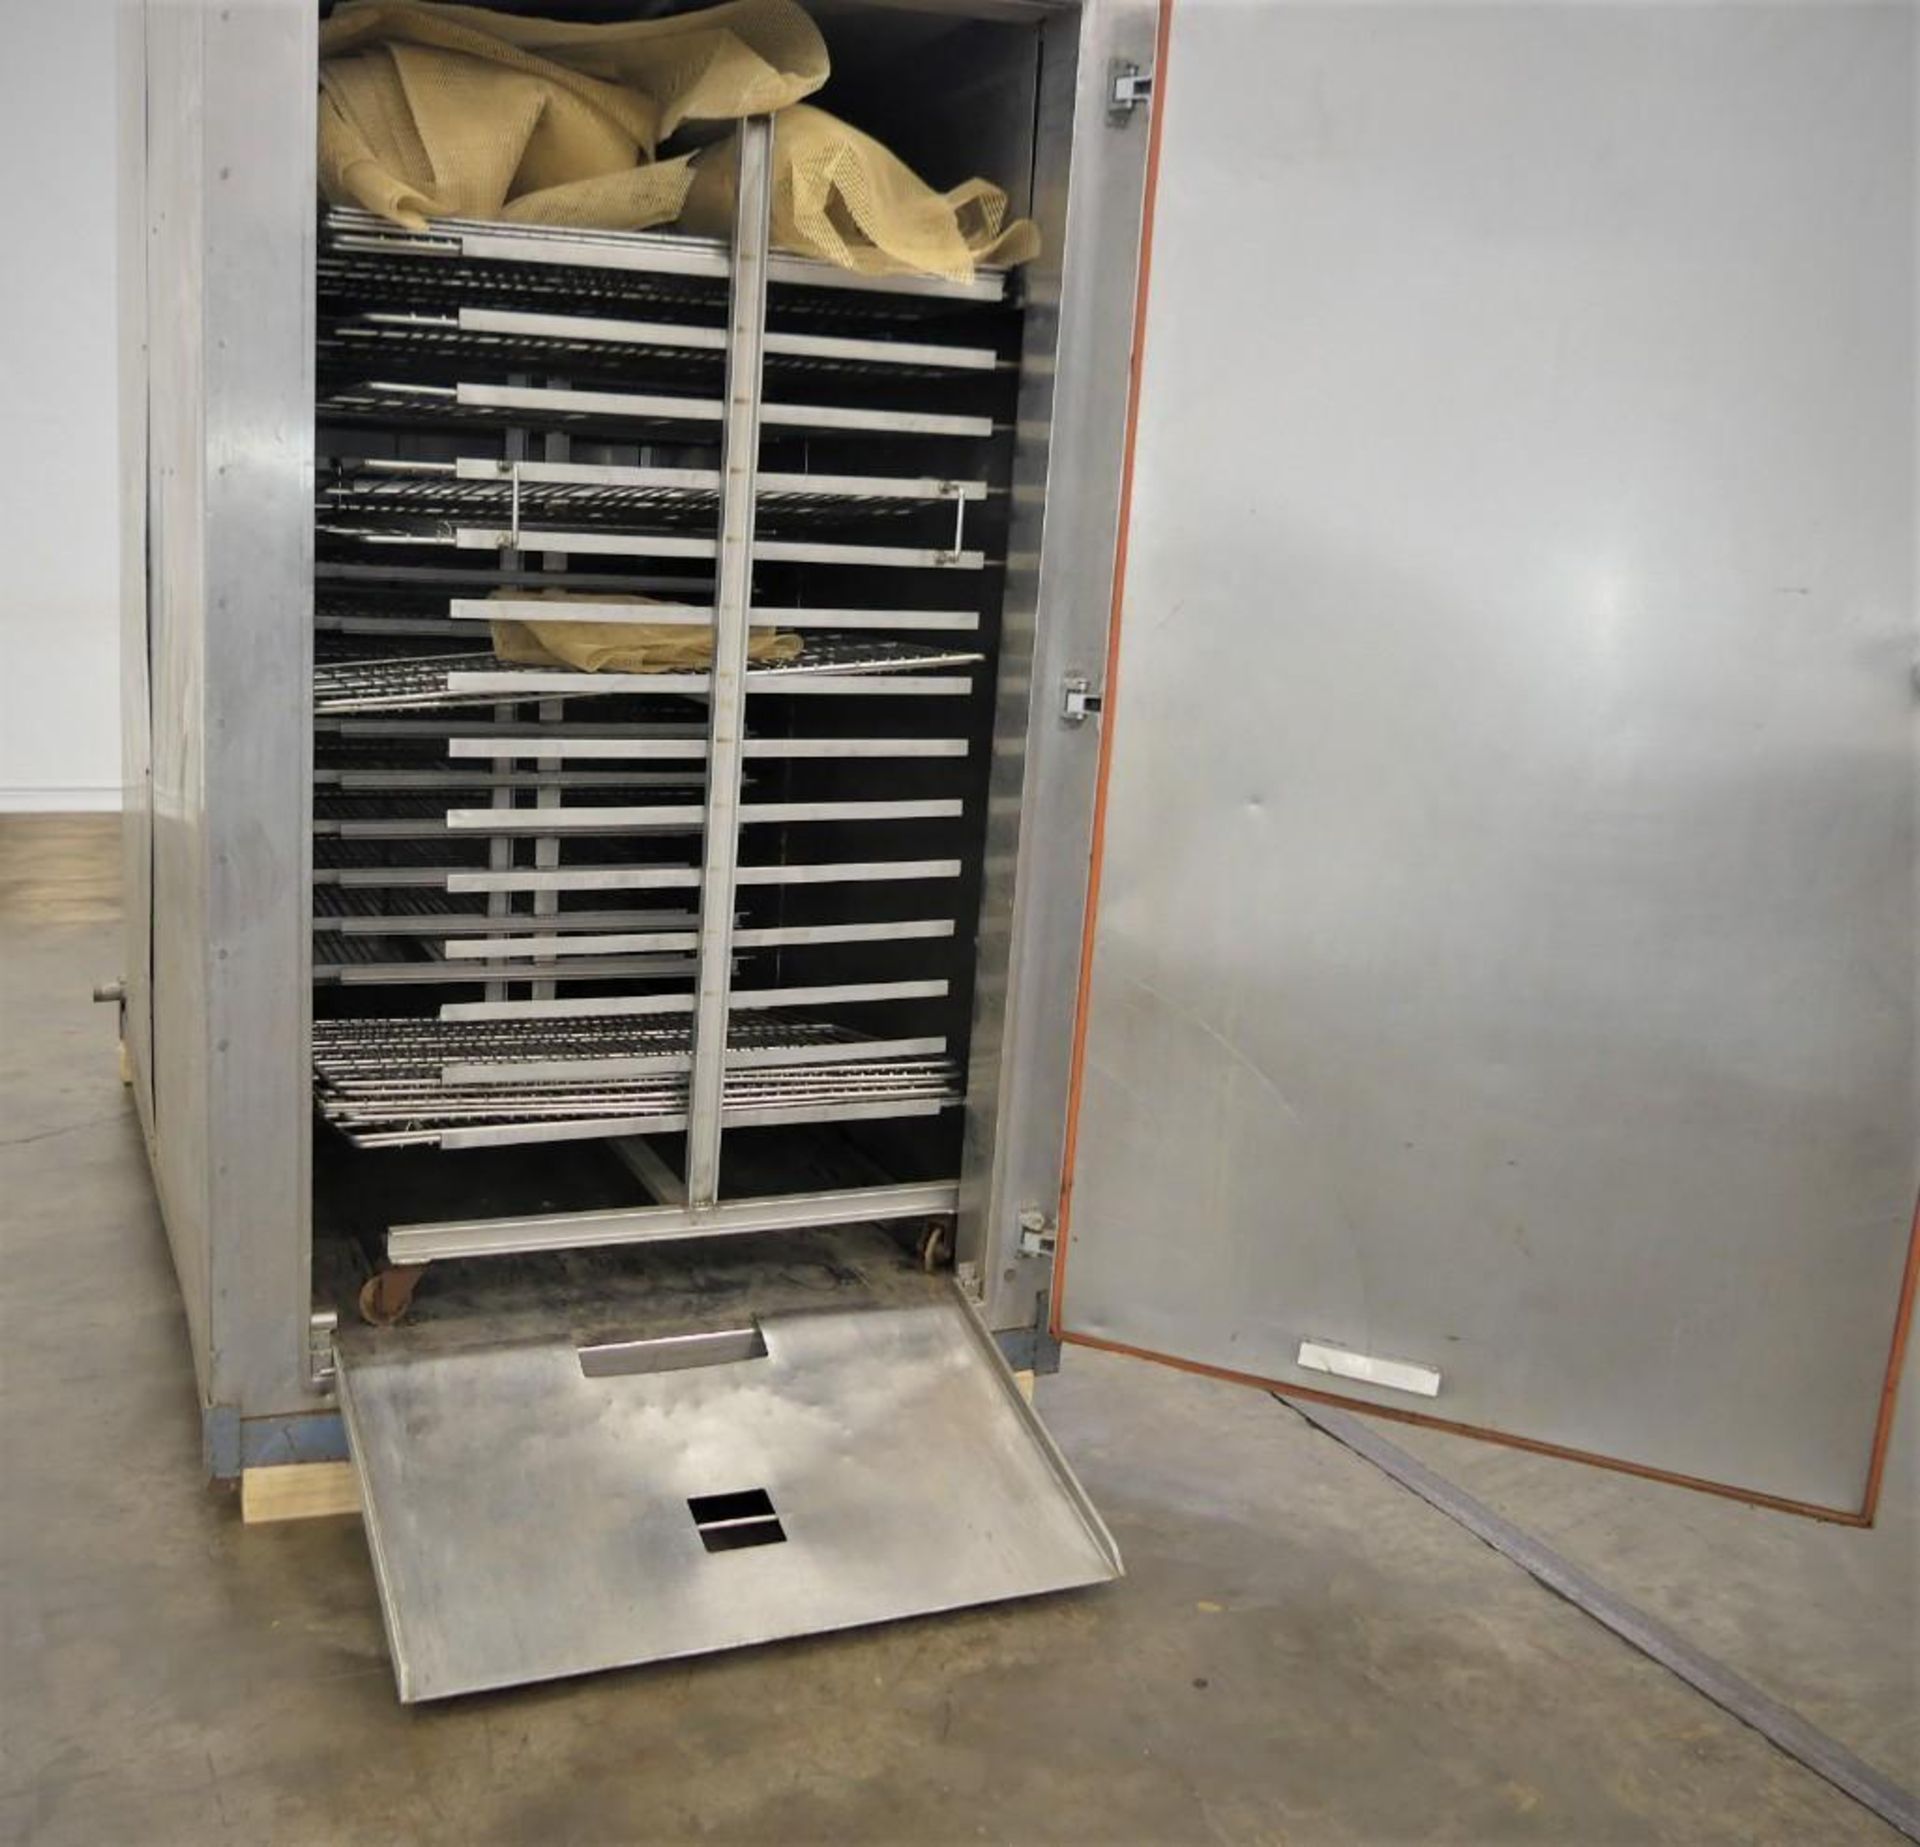 Maurer & Sohne Two Truck Stainless Smokehouse - Image 4 of 10